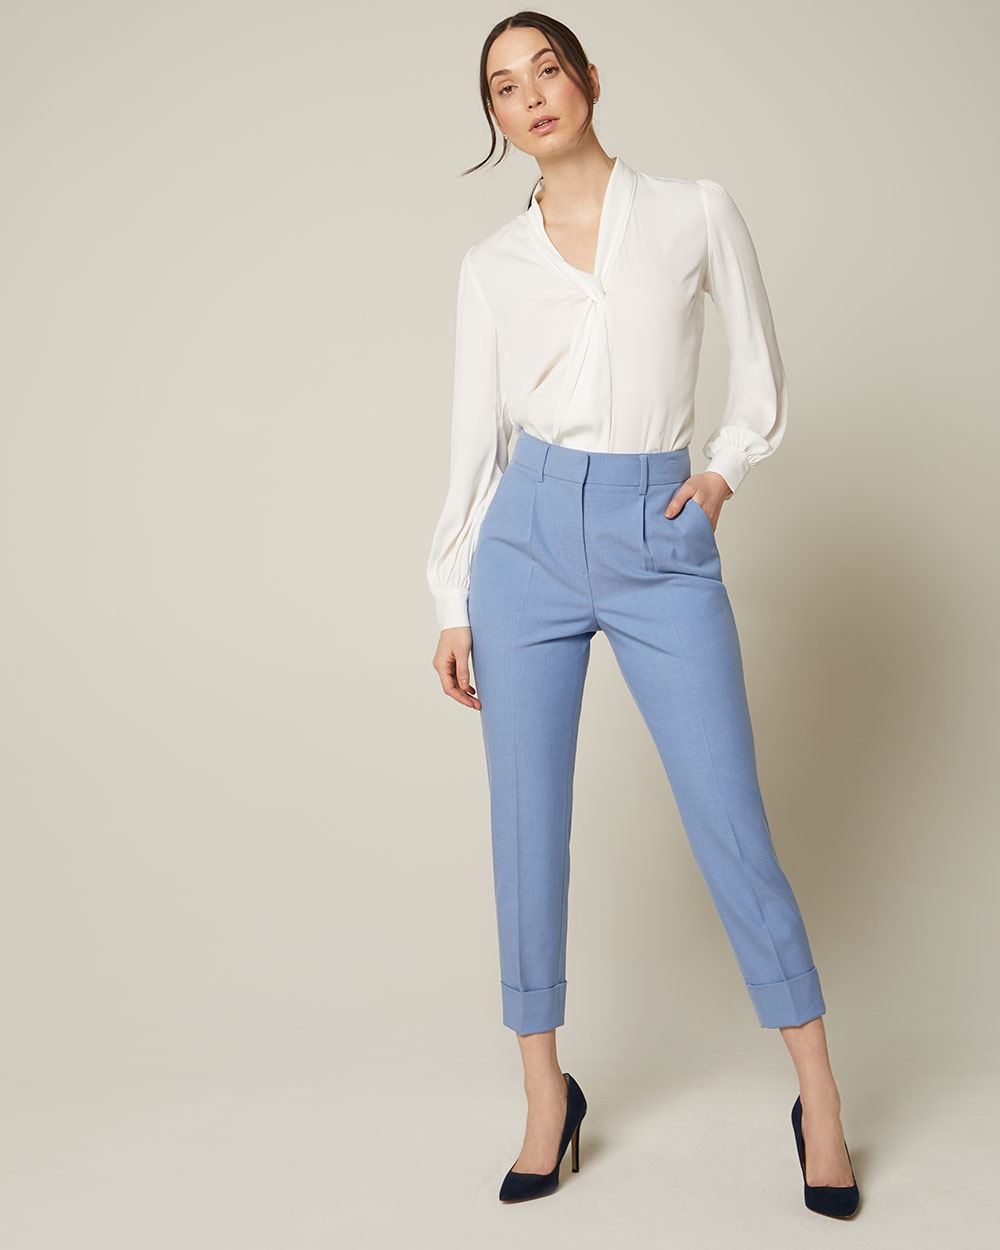 High-waist tapered leg stretch blue ankle pant | RW&CO.